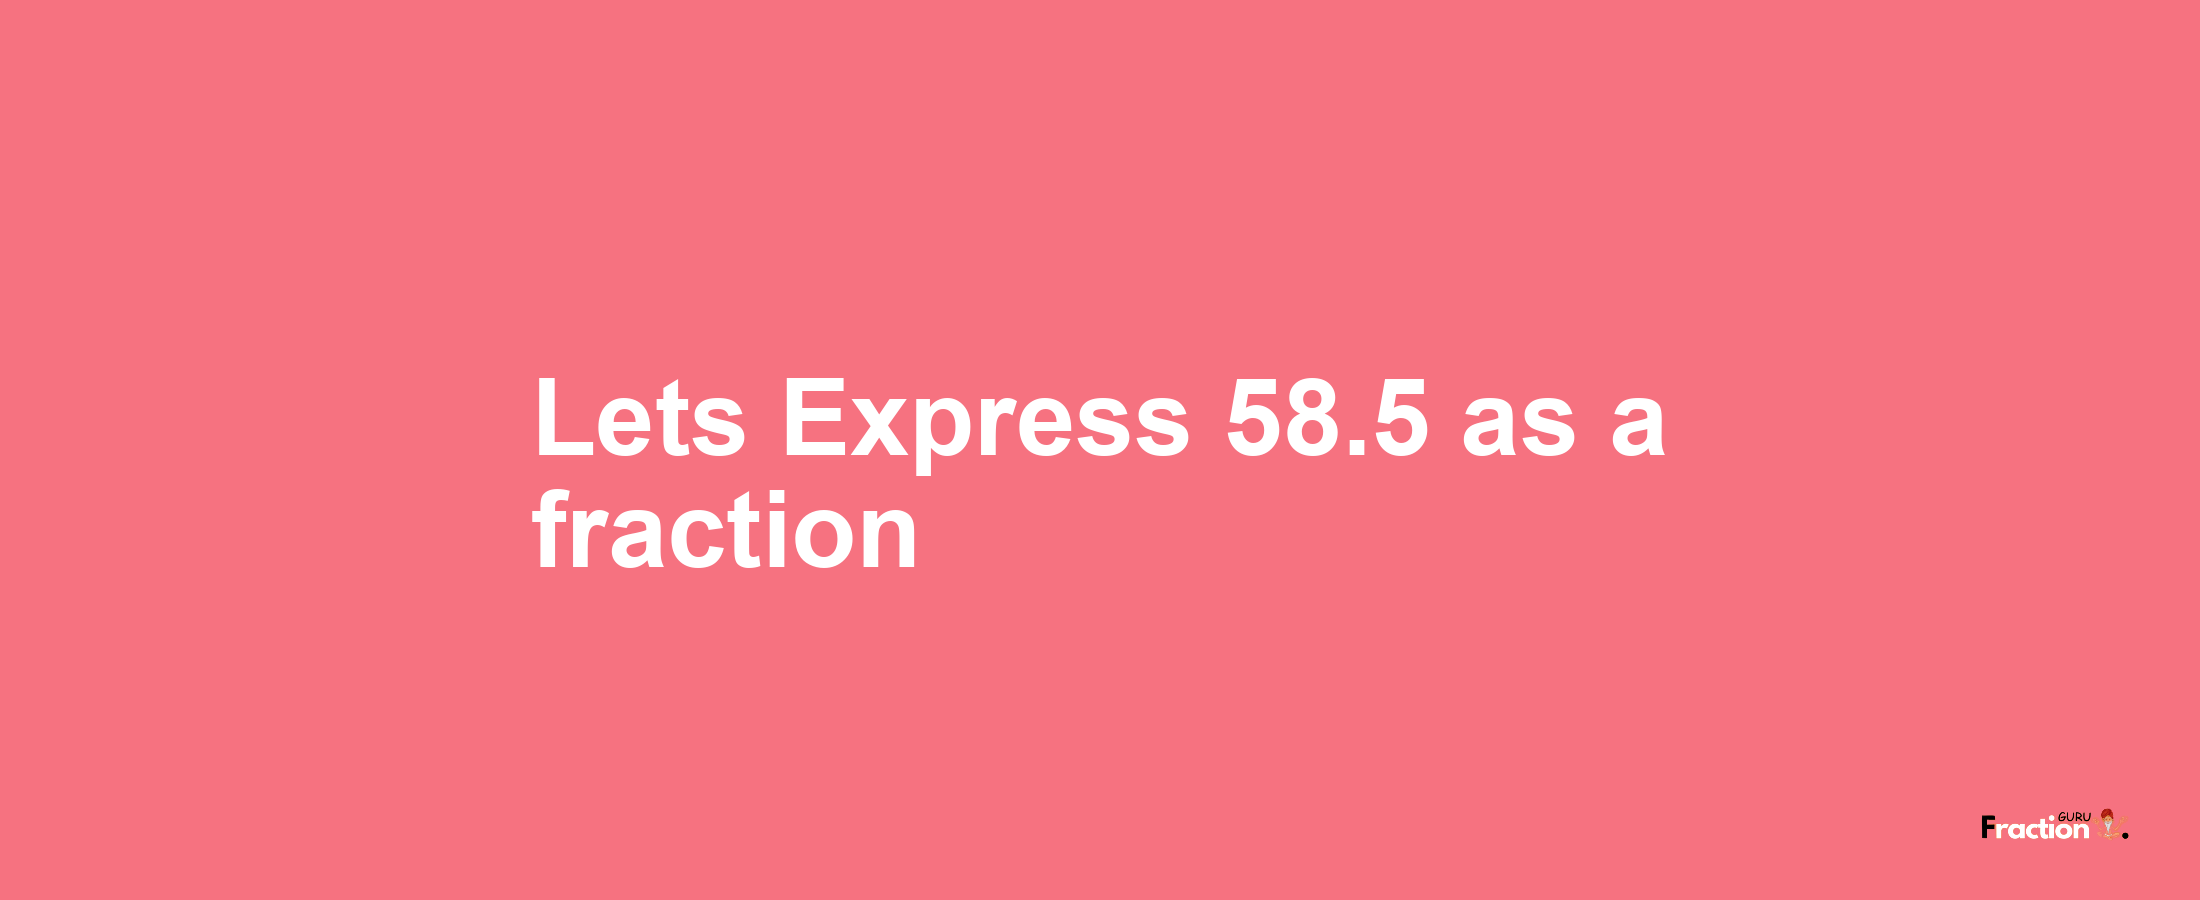 Lets Express 58.5 as afraction